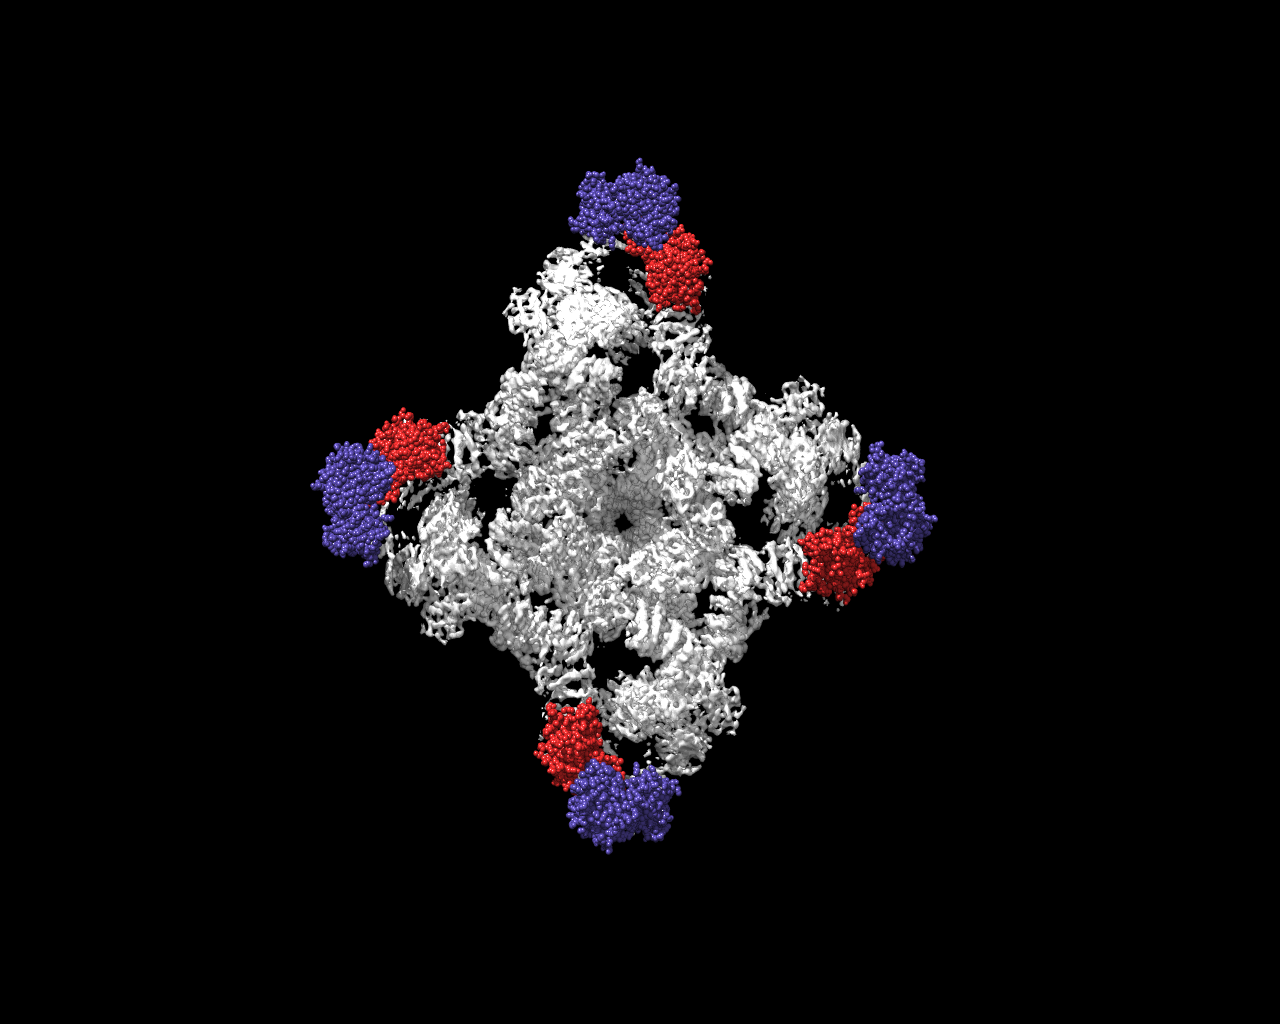 The full Ryanodine Receptor (grey) with the enzyme (blue) and the domain that receives the tag (red).